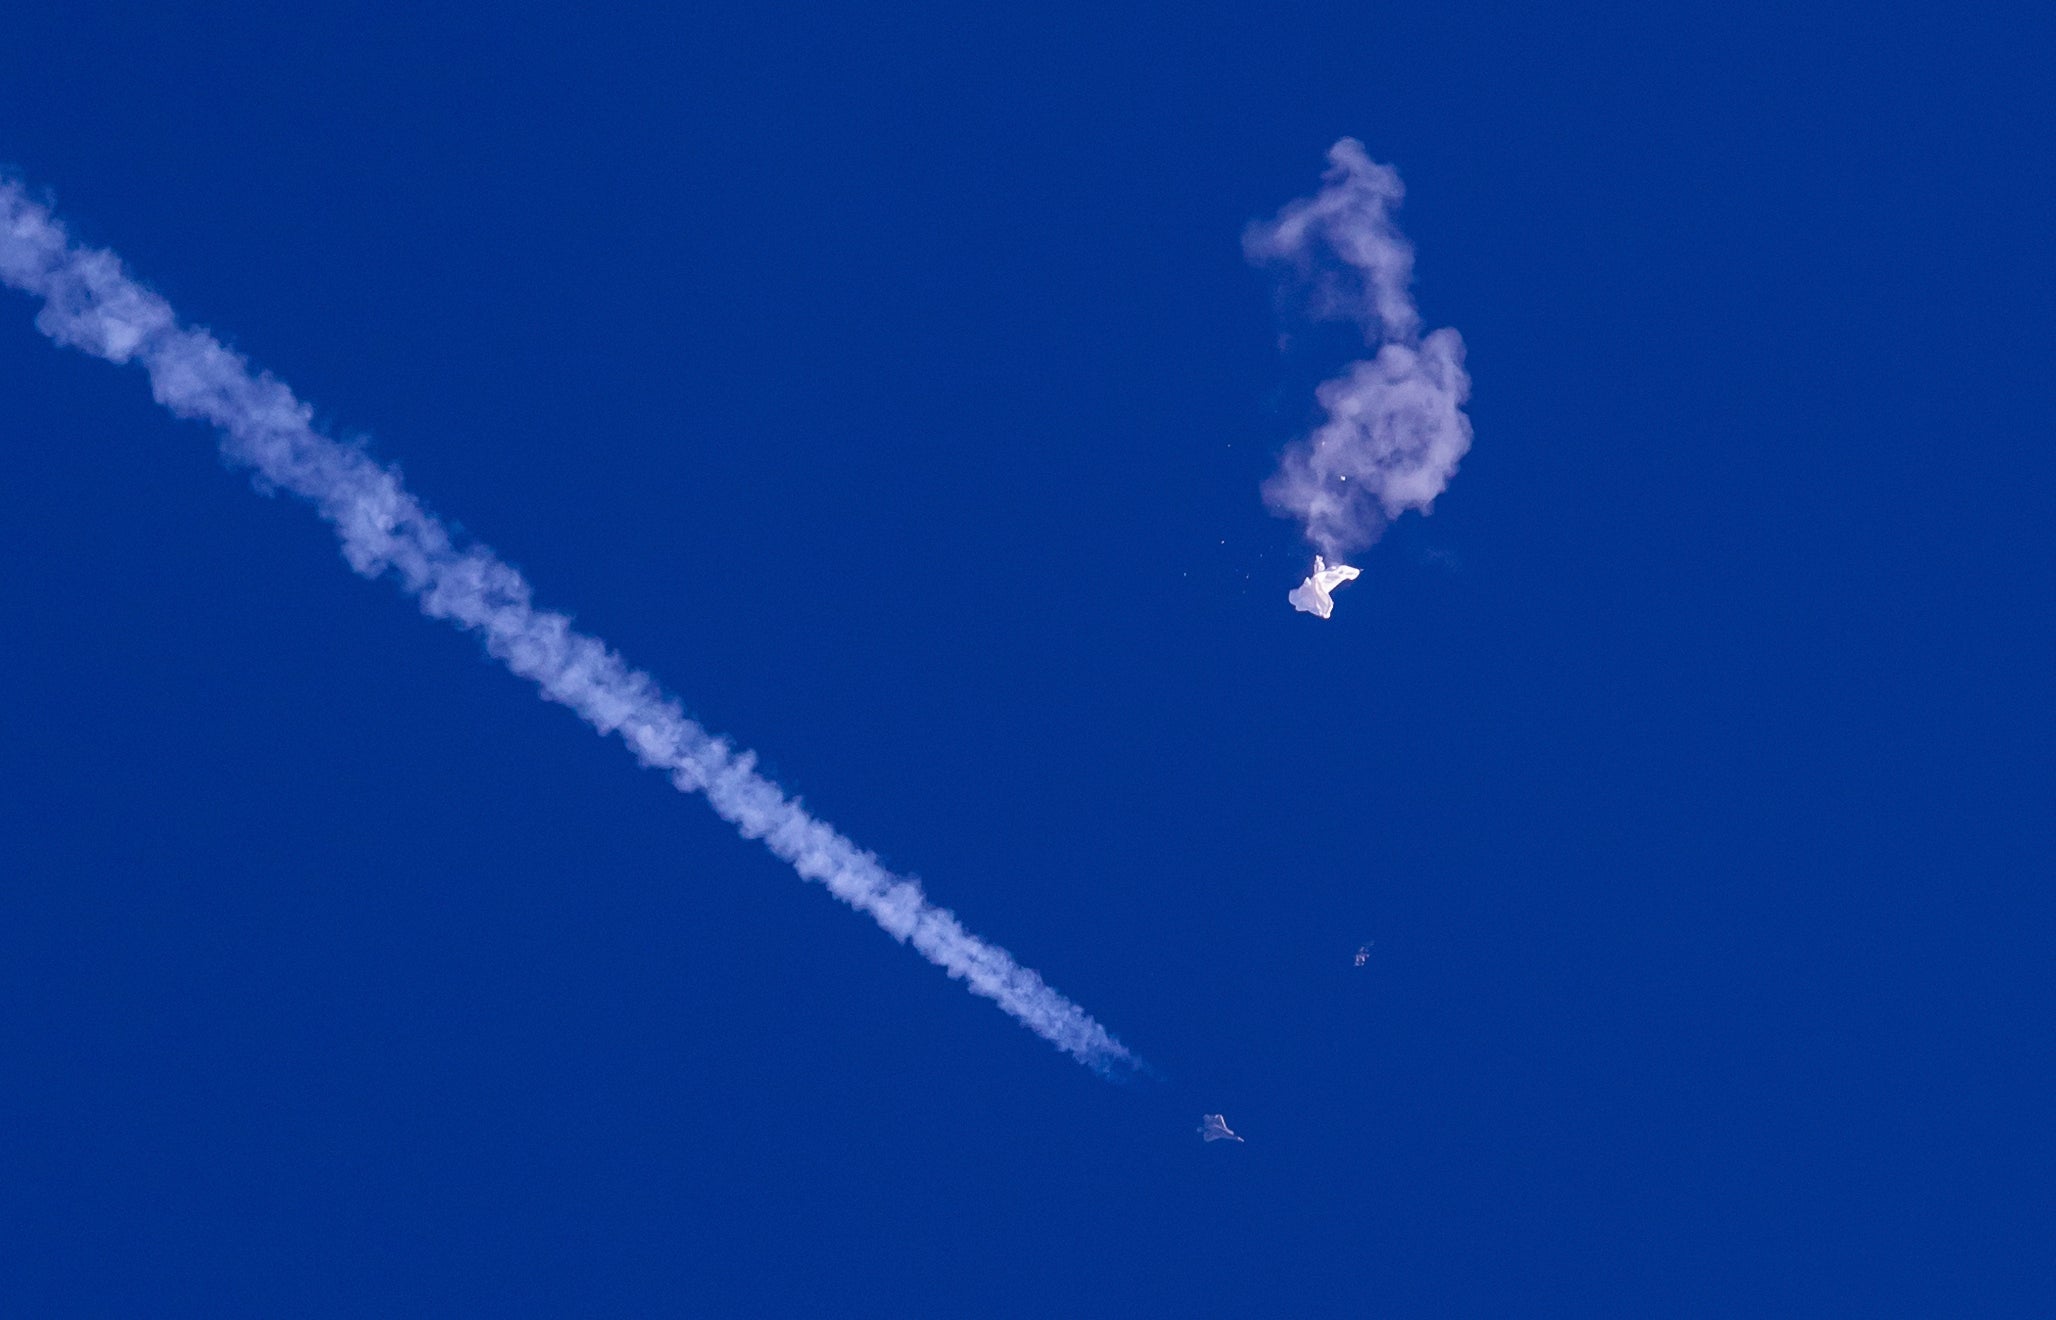 In this photo provided by Chad Fish, the remnants of a large balloon drift above the Atlantic Ocean, just off the coast of South Carolina, with a fighter jet and its contrail seen below it on 4 February